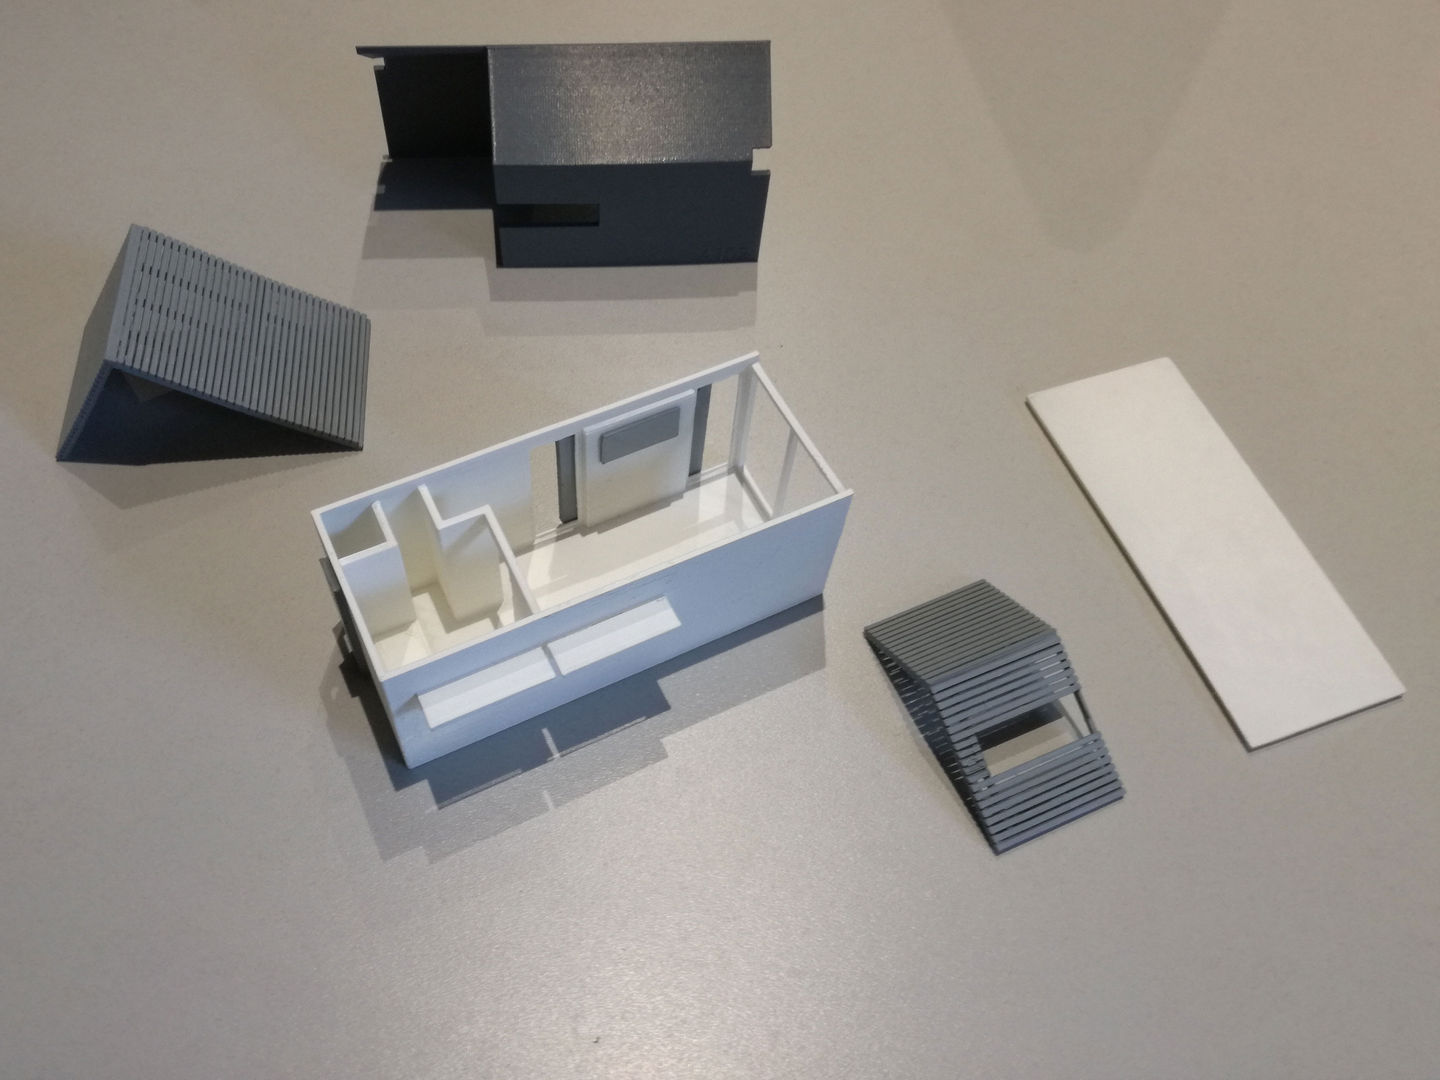 3d Printing, A4AC Architects A4AC Architects